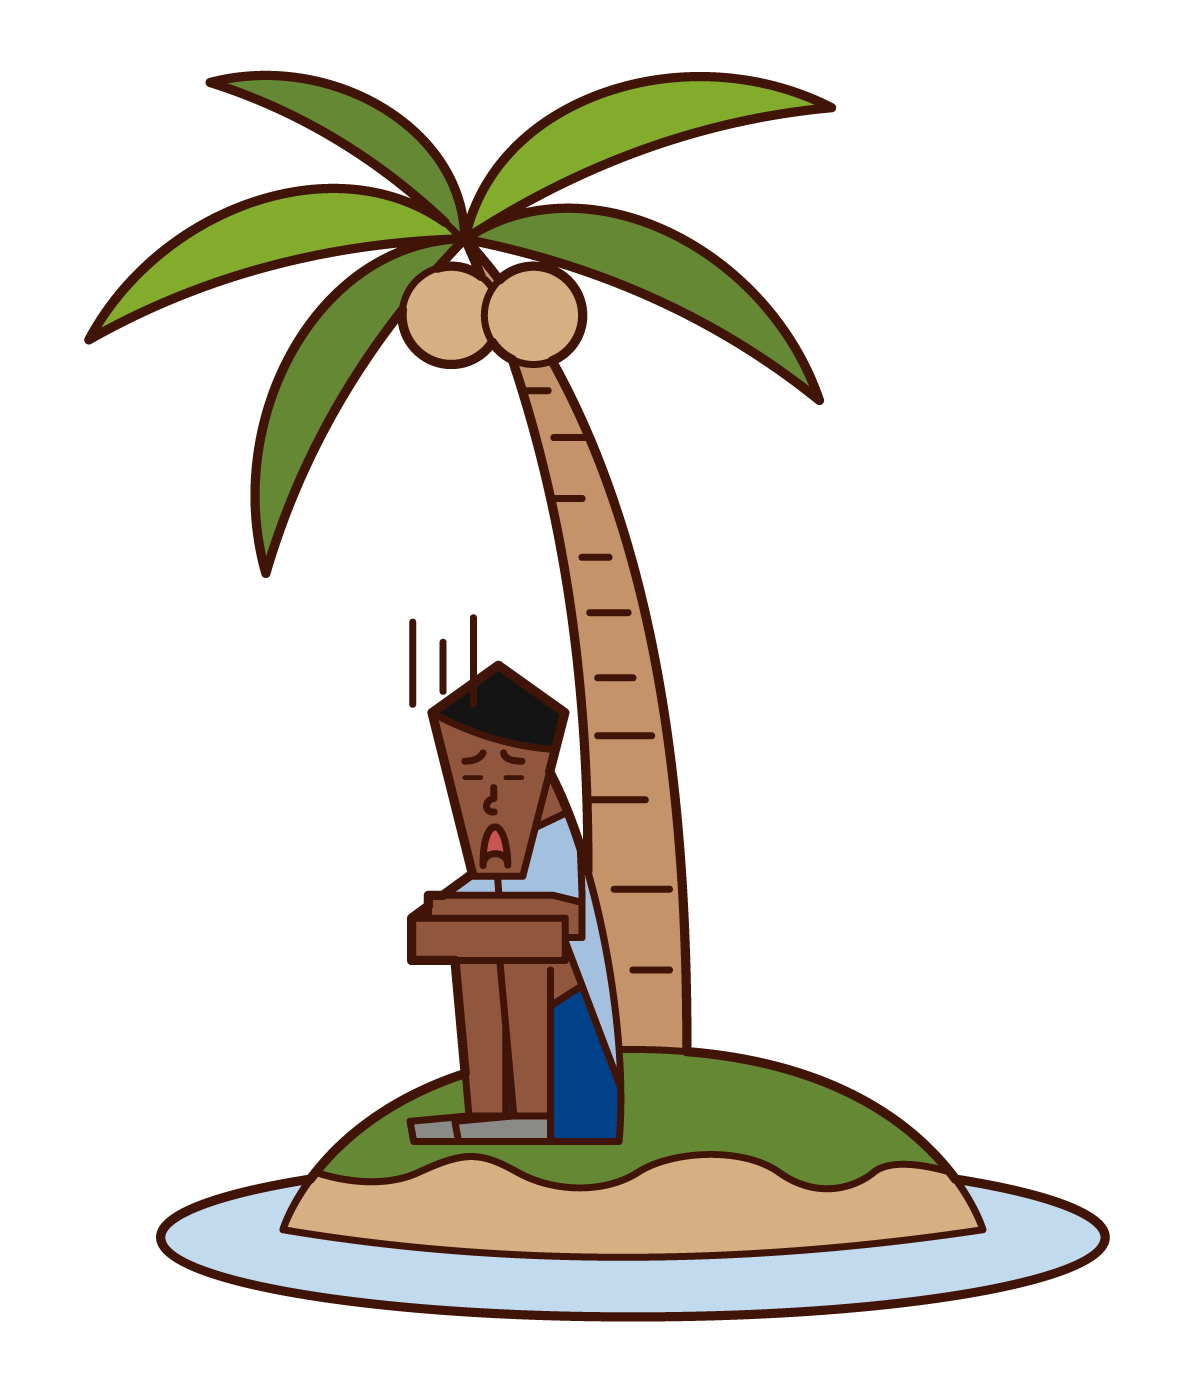 Illustration of a man who arrived at a deserted island in distress